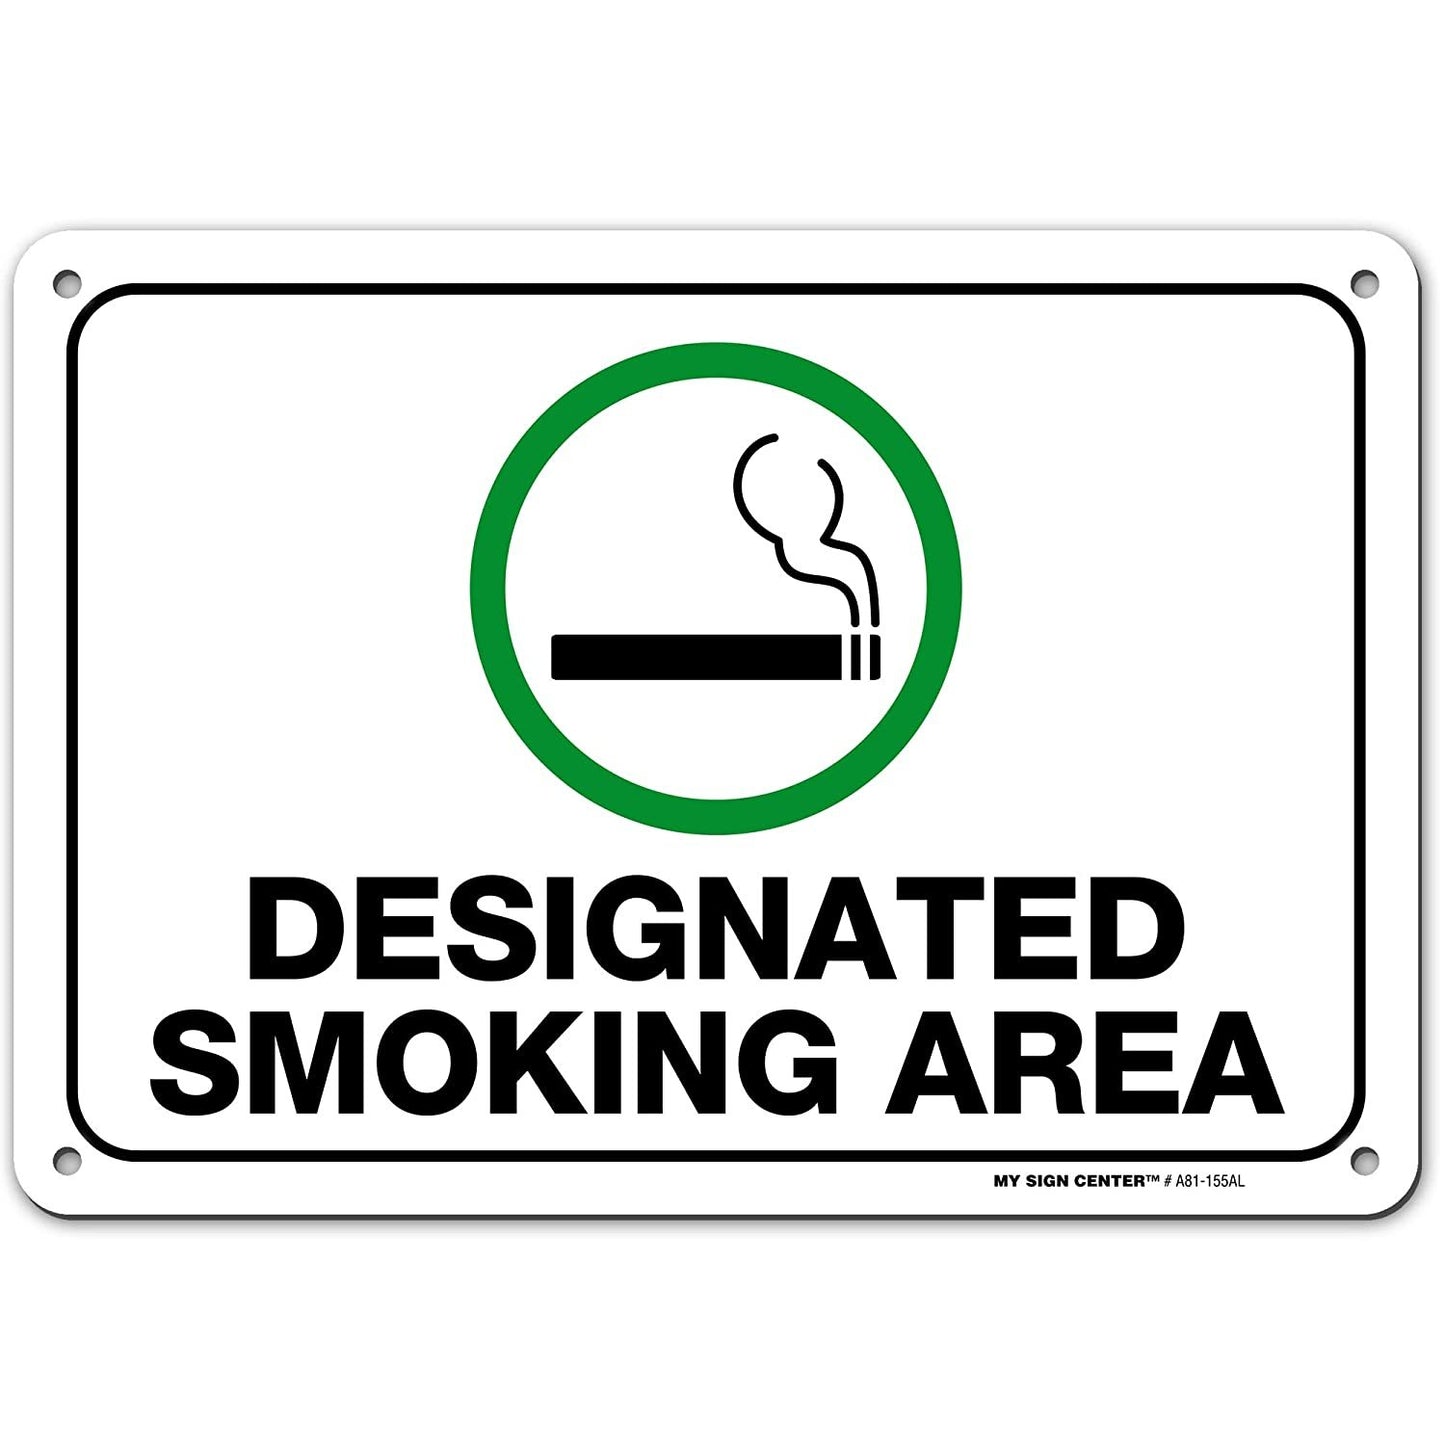 Designated Smoking Area Sign by My Sign Center